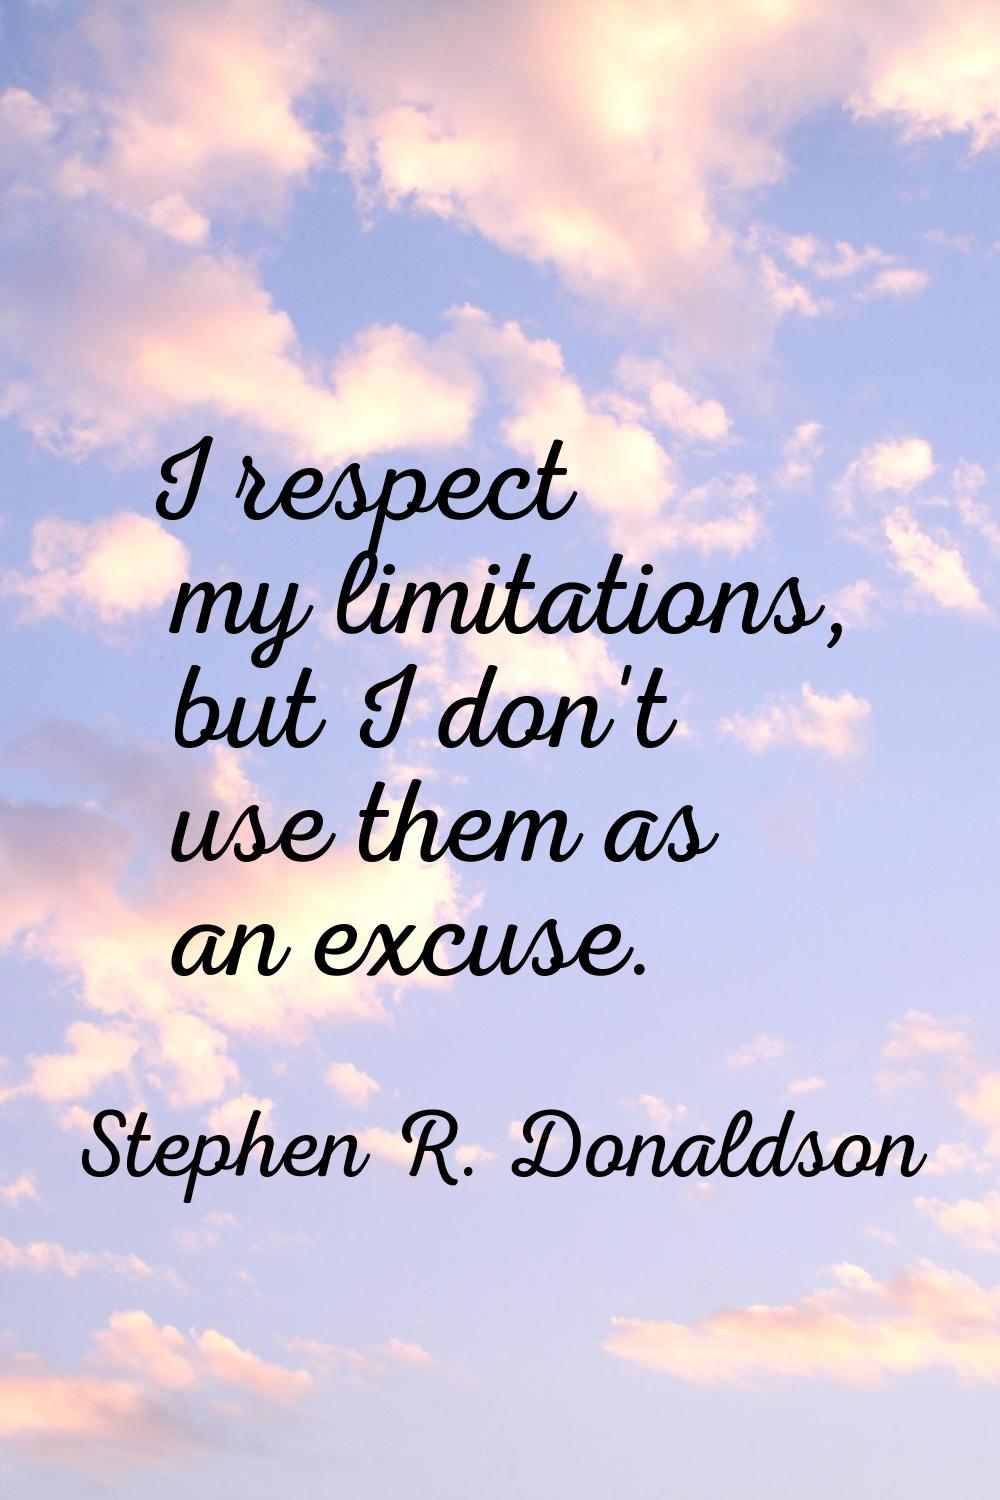 I respect my limitations, but I don't use them as an excuse.